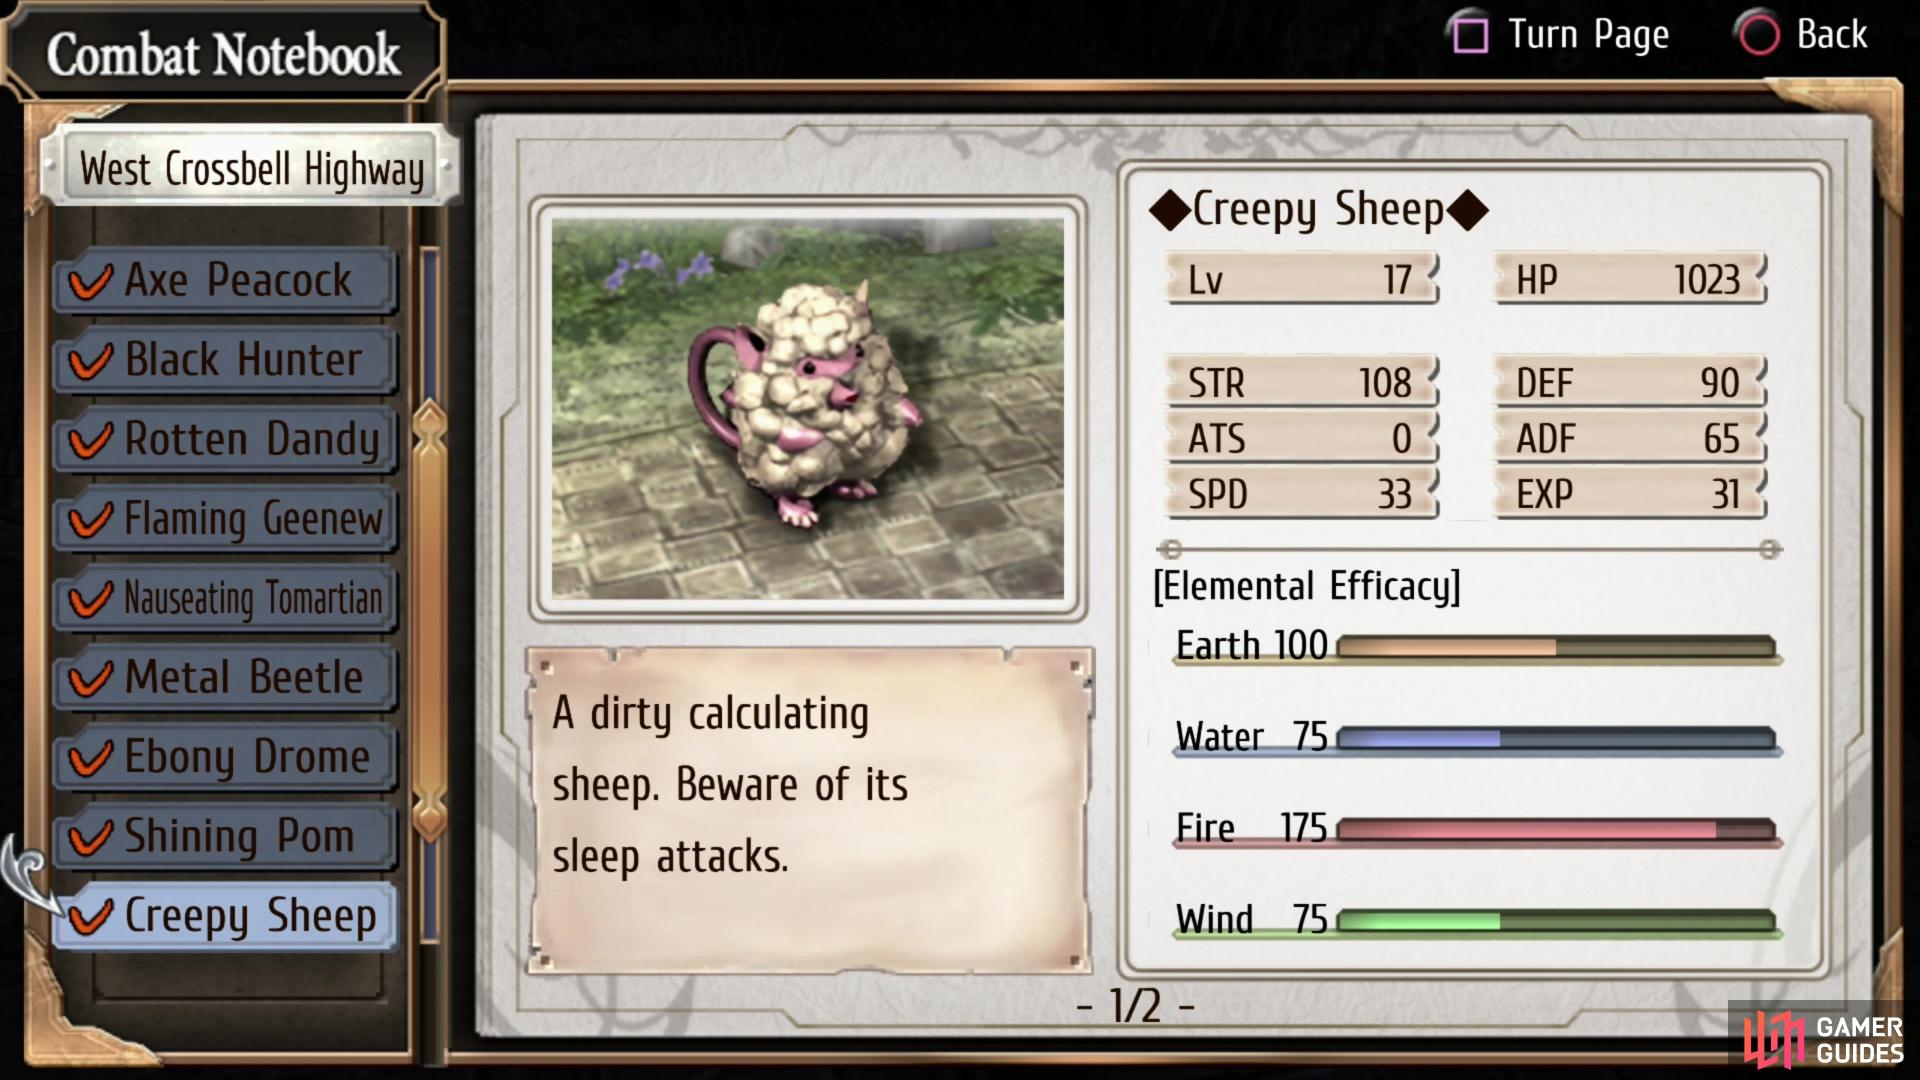 The bestiary entry for the Creepy Sheep.